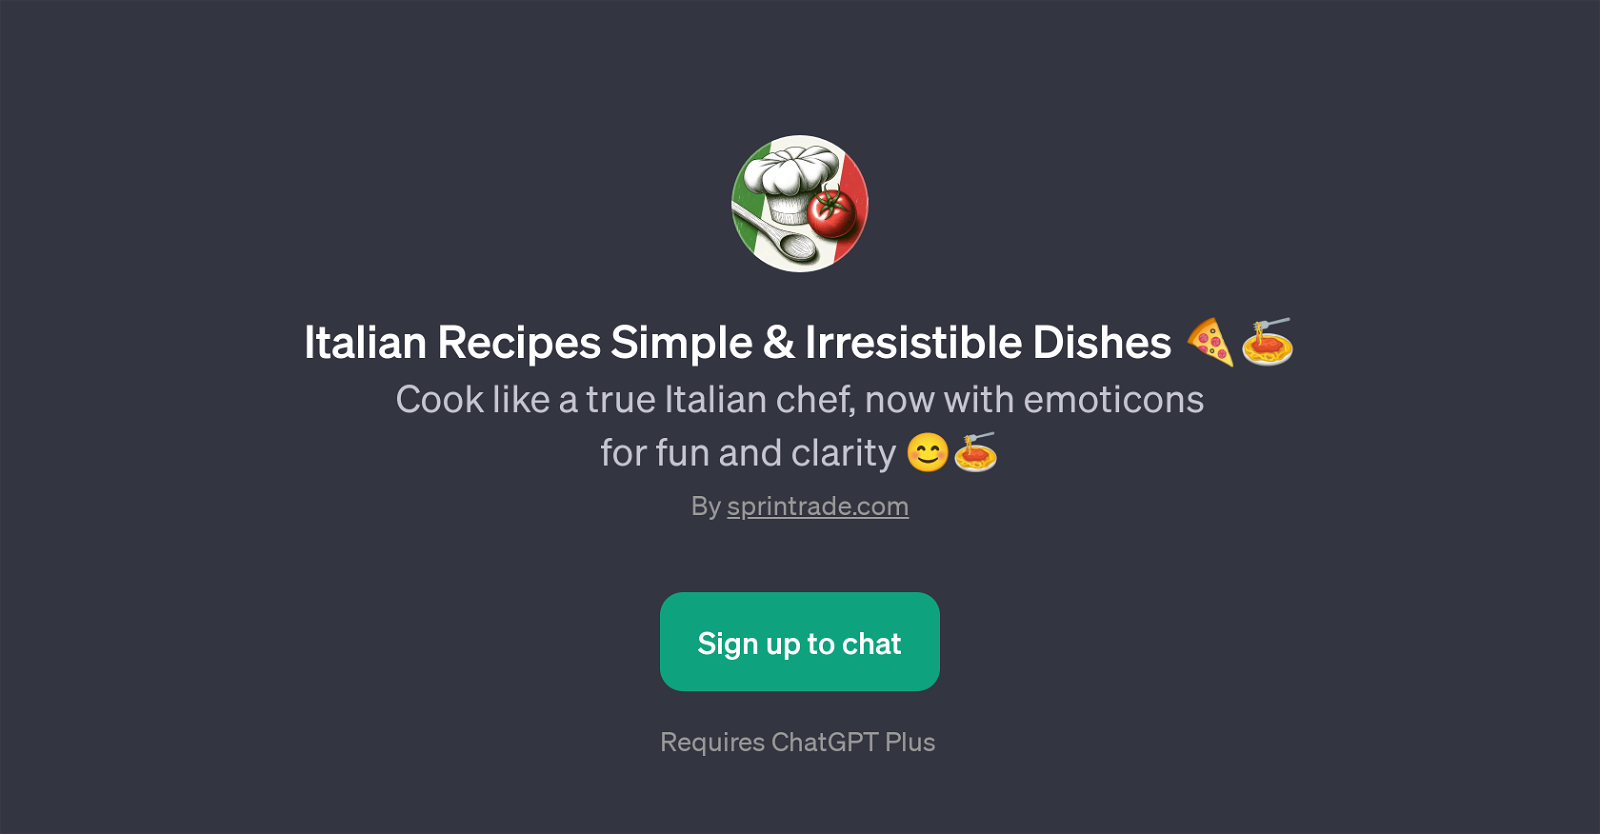 Italian Recipes Simple & Irresistible Dishes website